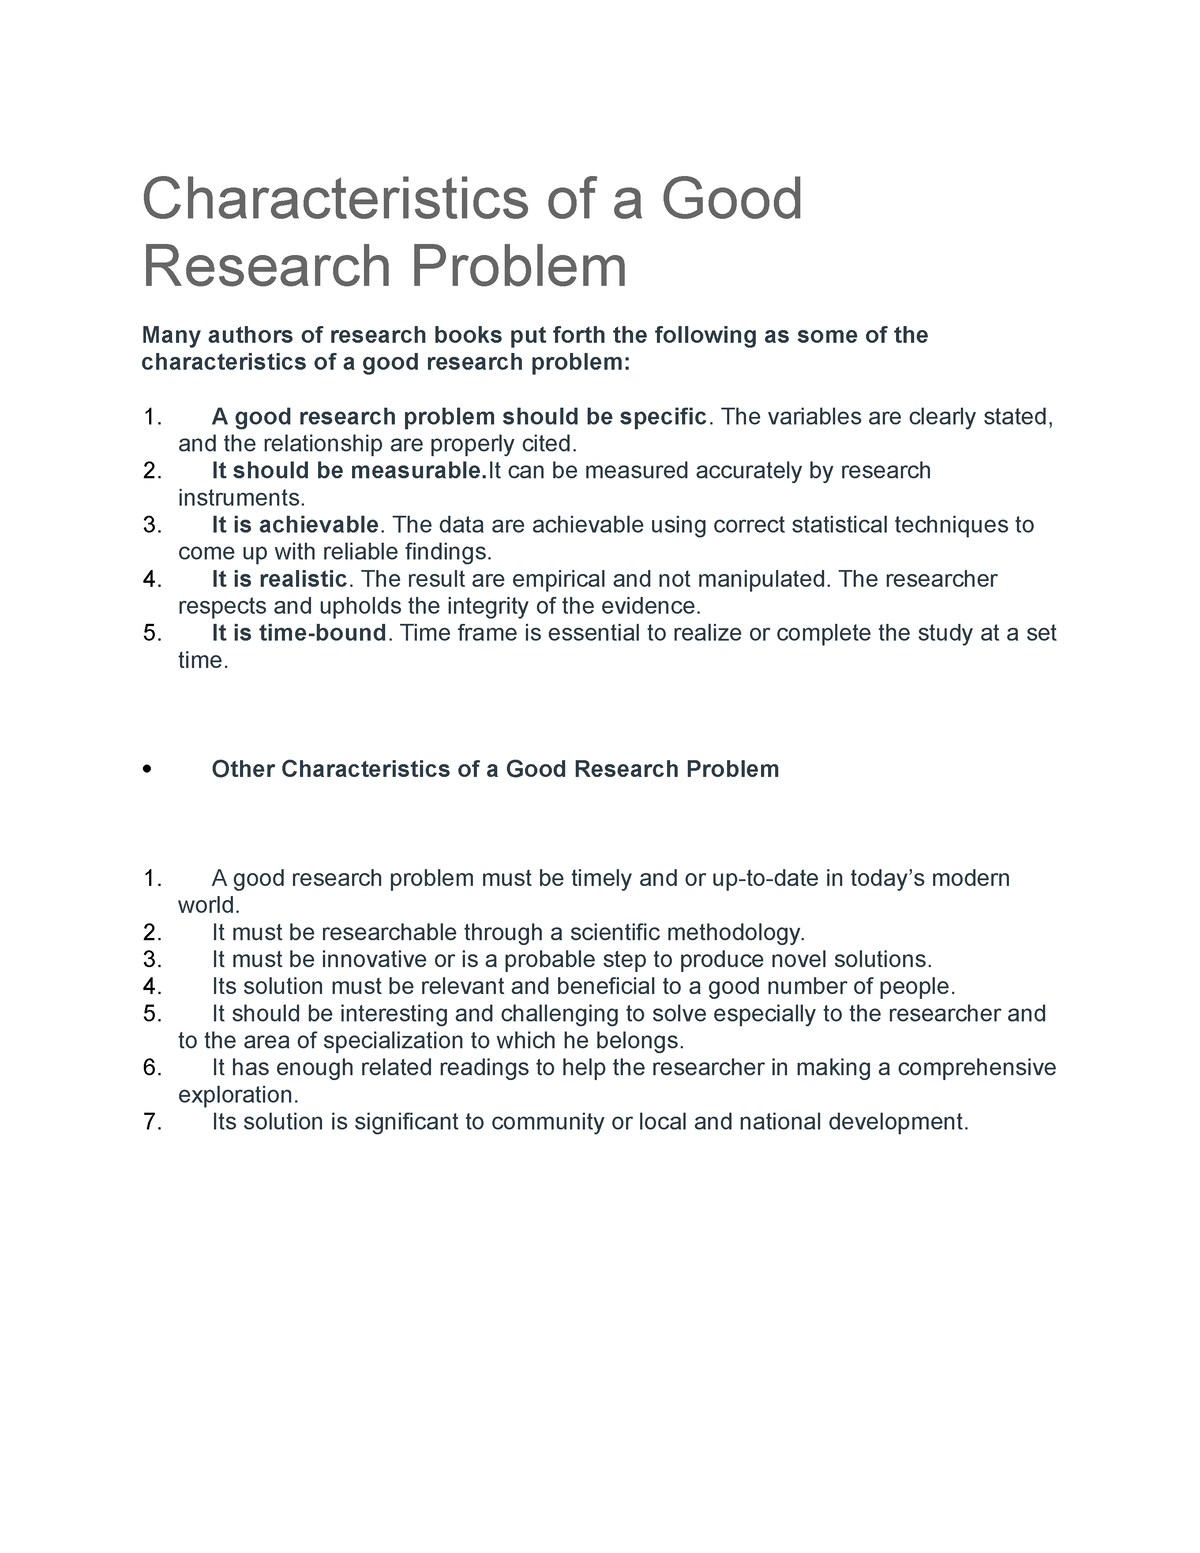 examples of good research problems